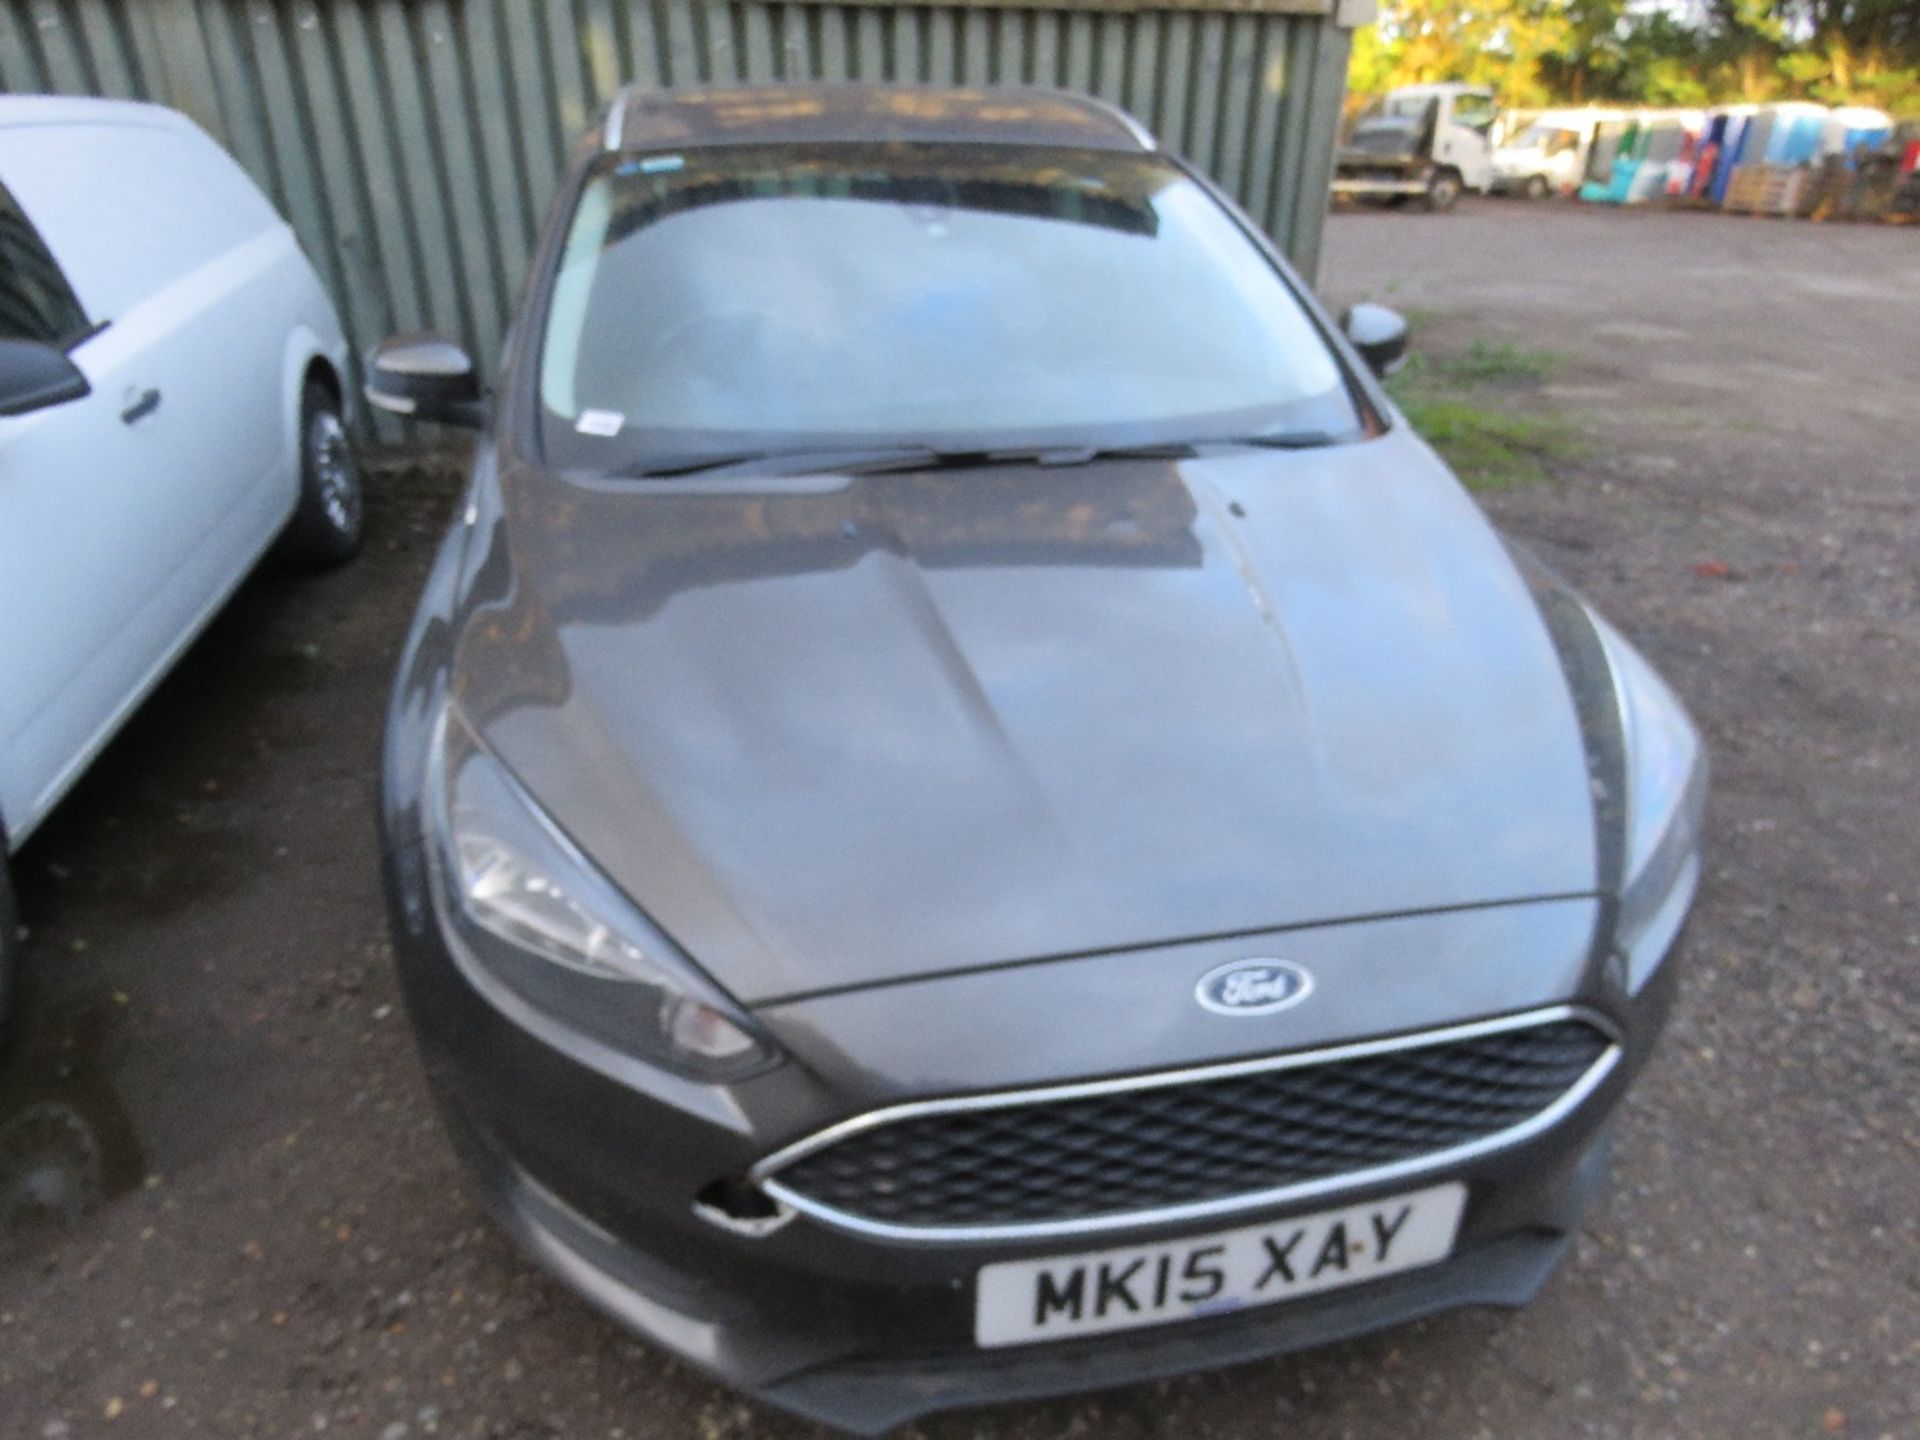 FORD FOCUS ESTATE CAR REG:MK15 XAY. SOLD AS NON RUNNER/ ENGINE REQUIRING ATTENTION. WITH V5 - Image 2 of 11